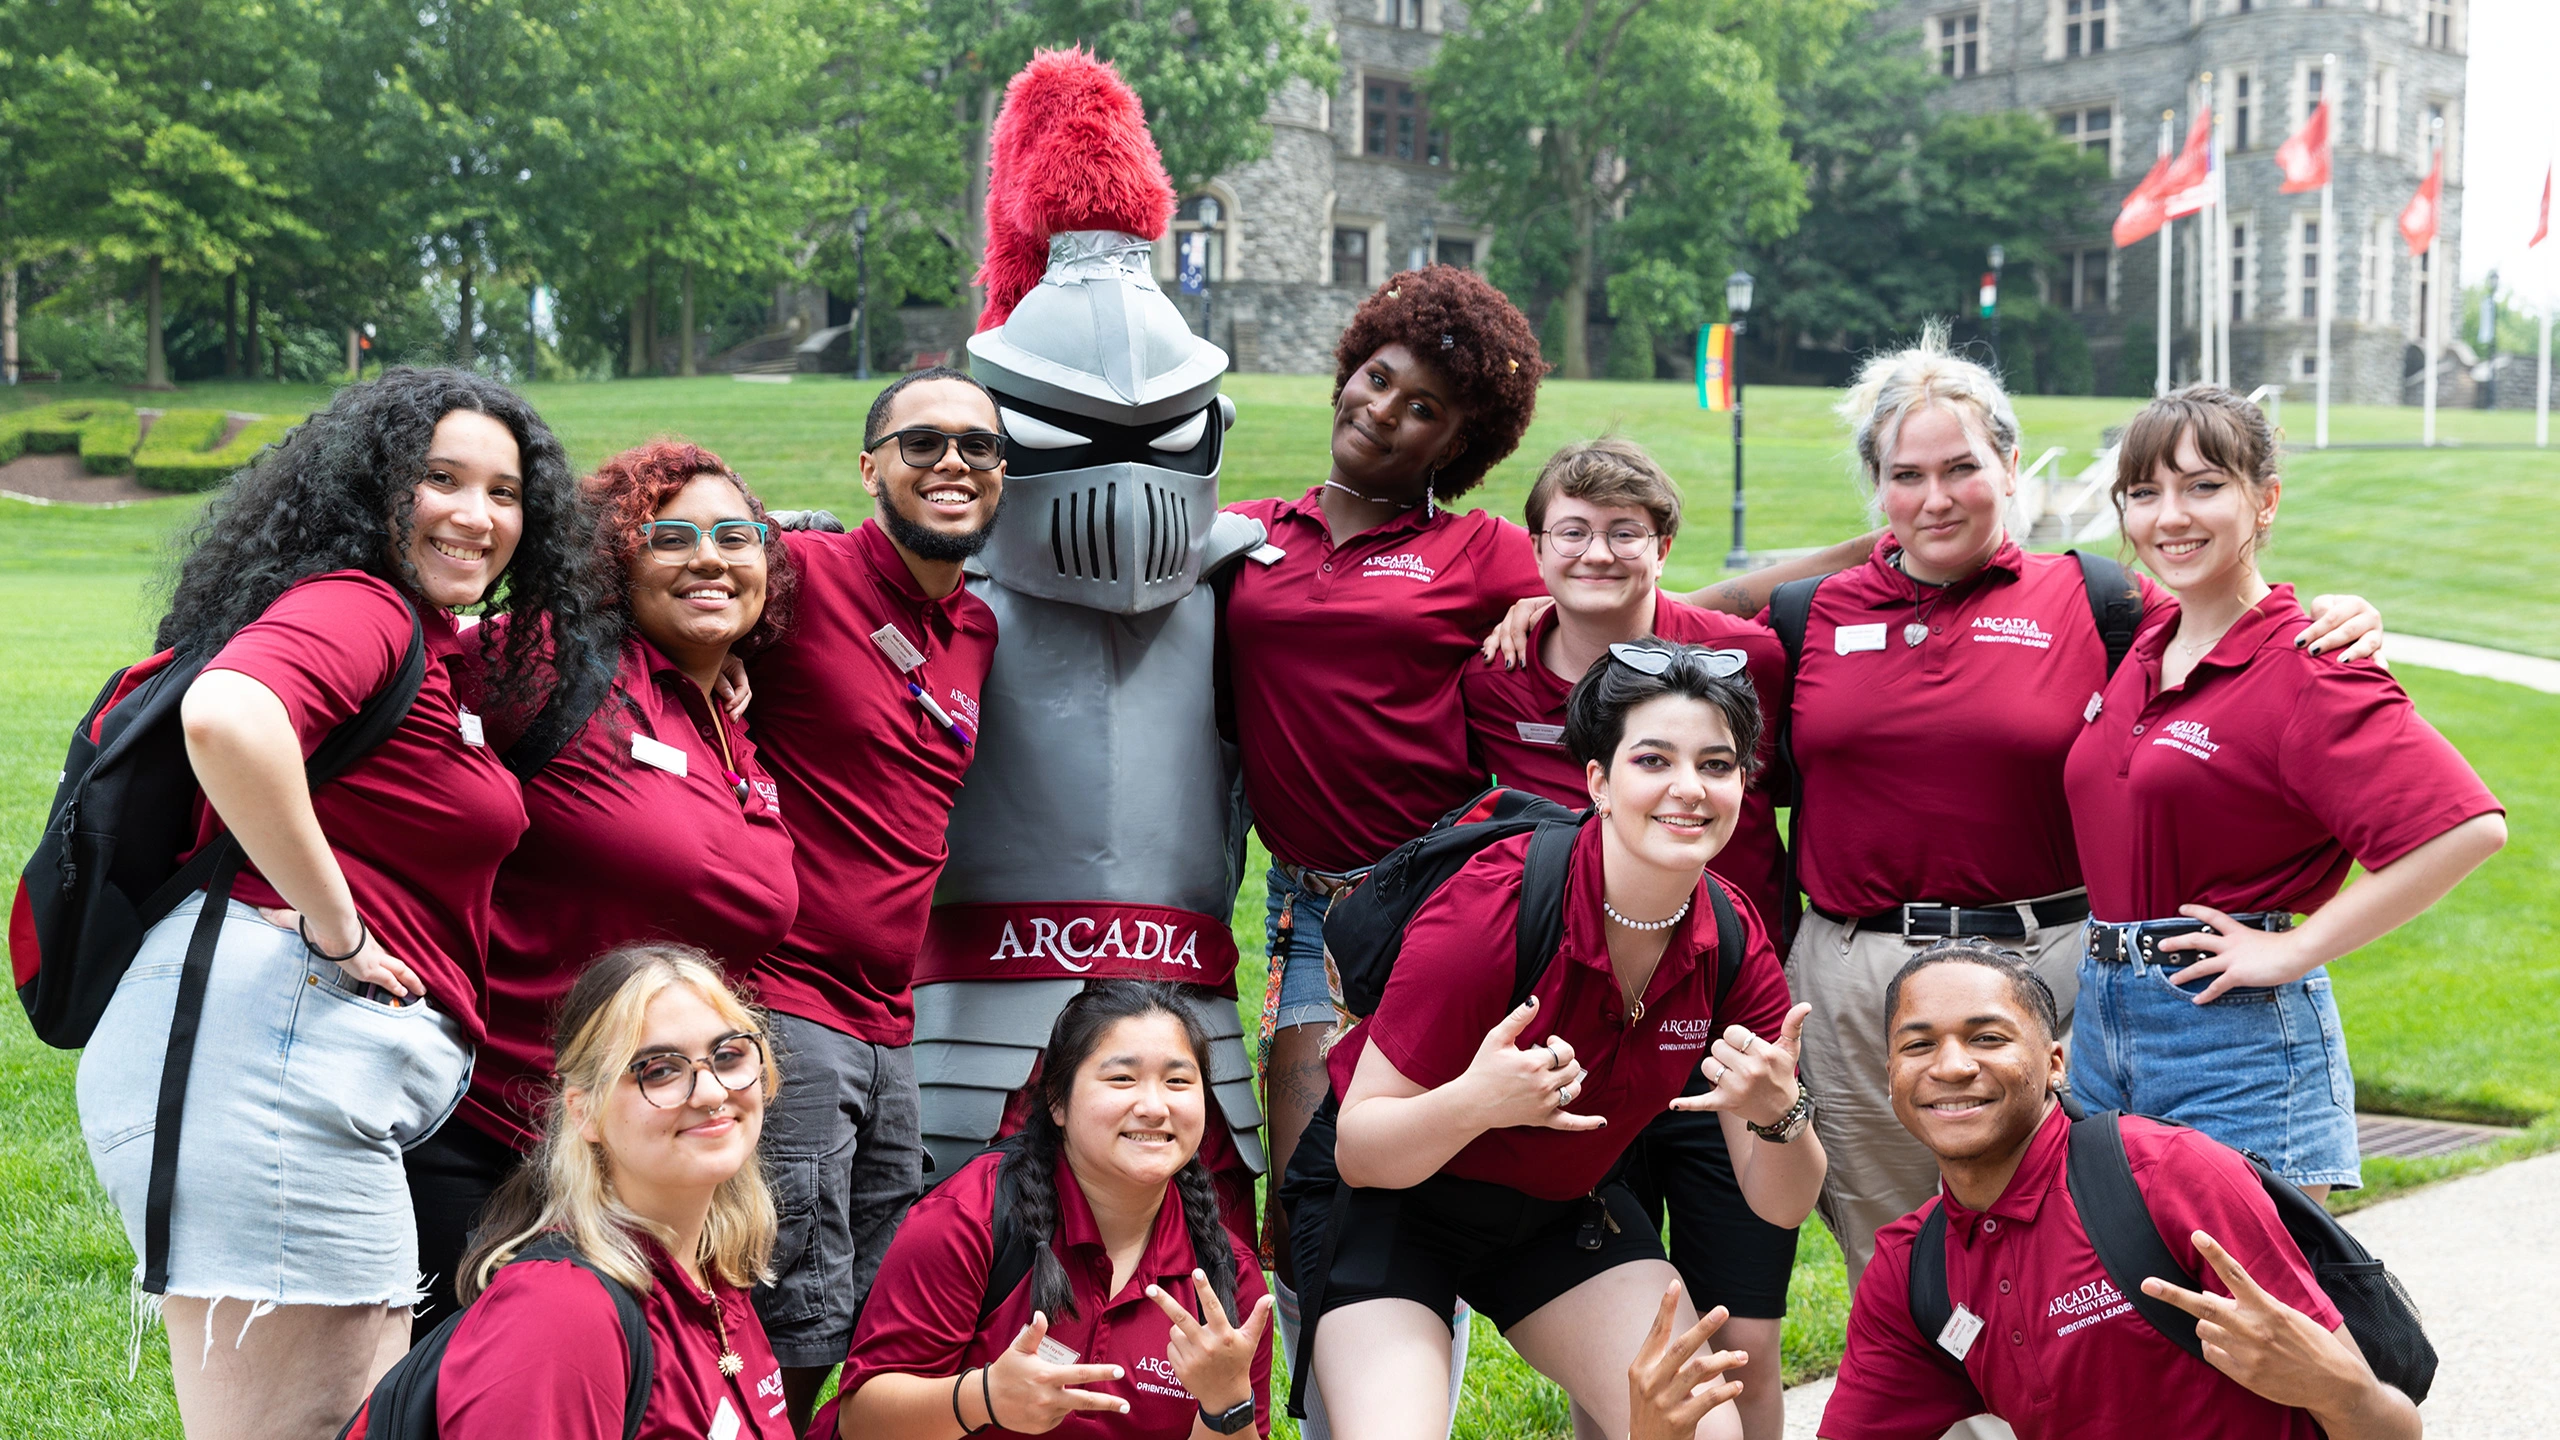 The team from Welcome to Arcadia wearing all-red poses with Archie, Arcadia's mascot.